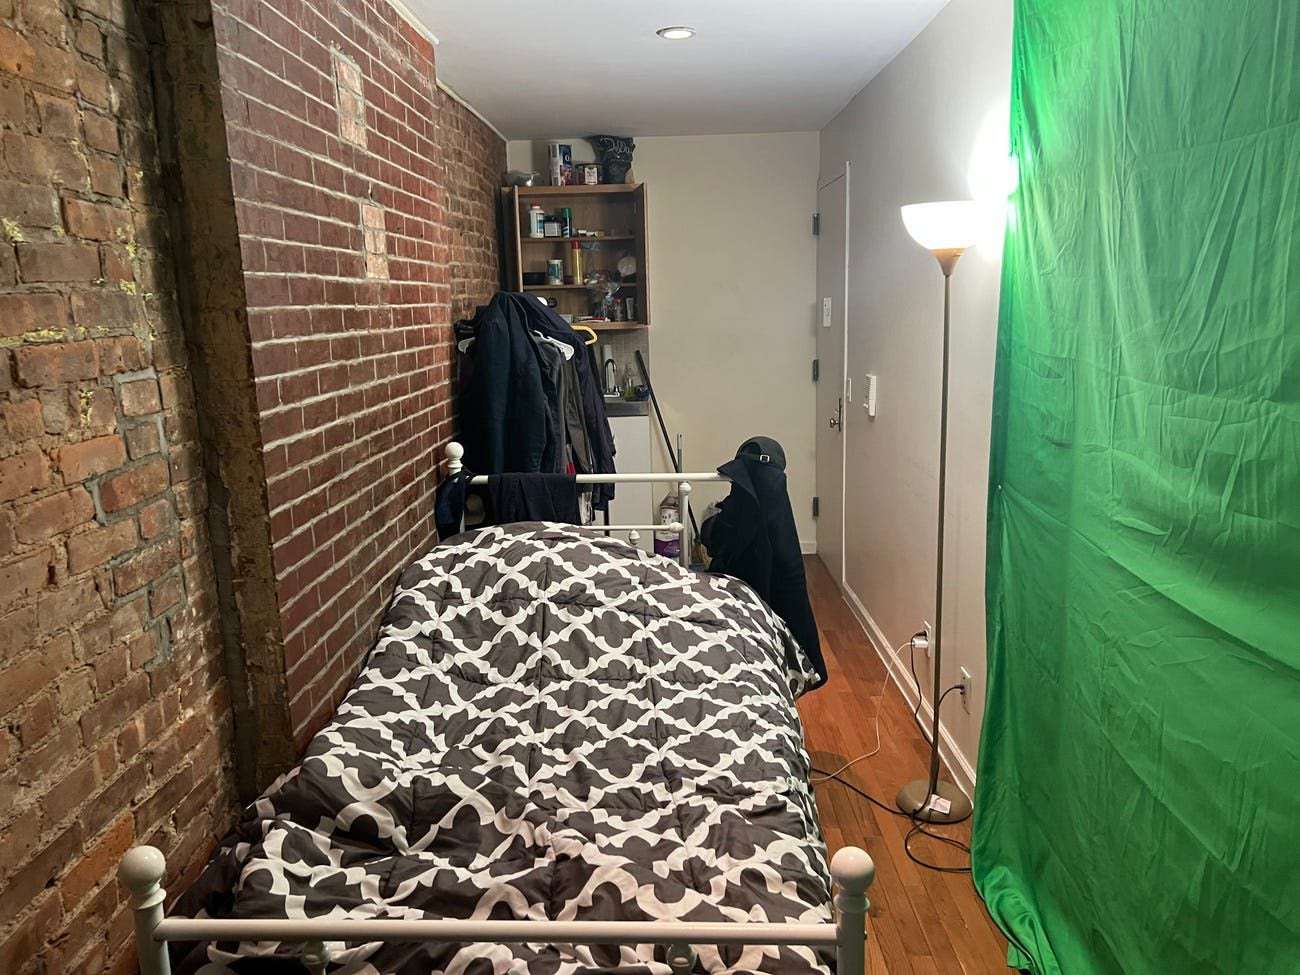 image showing $950 a month apartment in NYC (Harlem). No stovetop or private bathroom